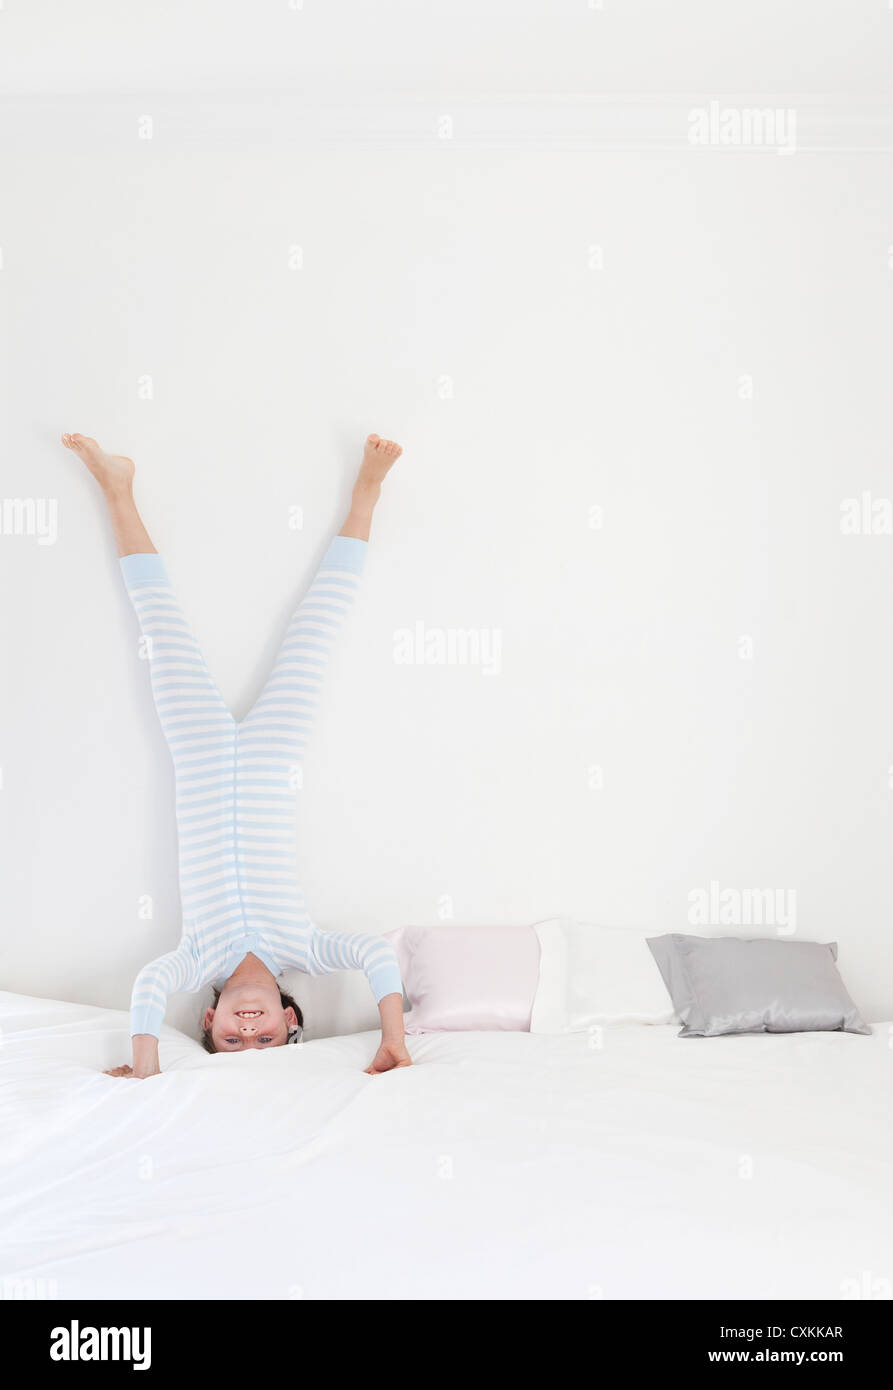 Young girl doing headstand on bed Stock Photo